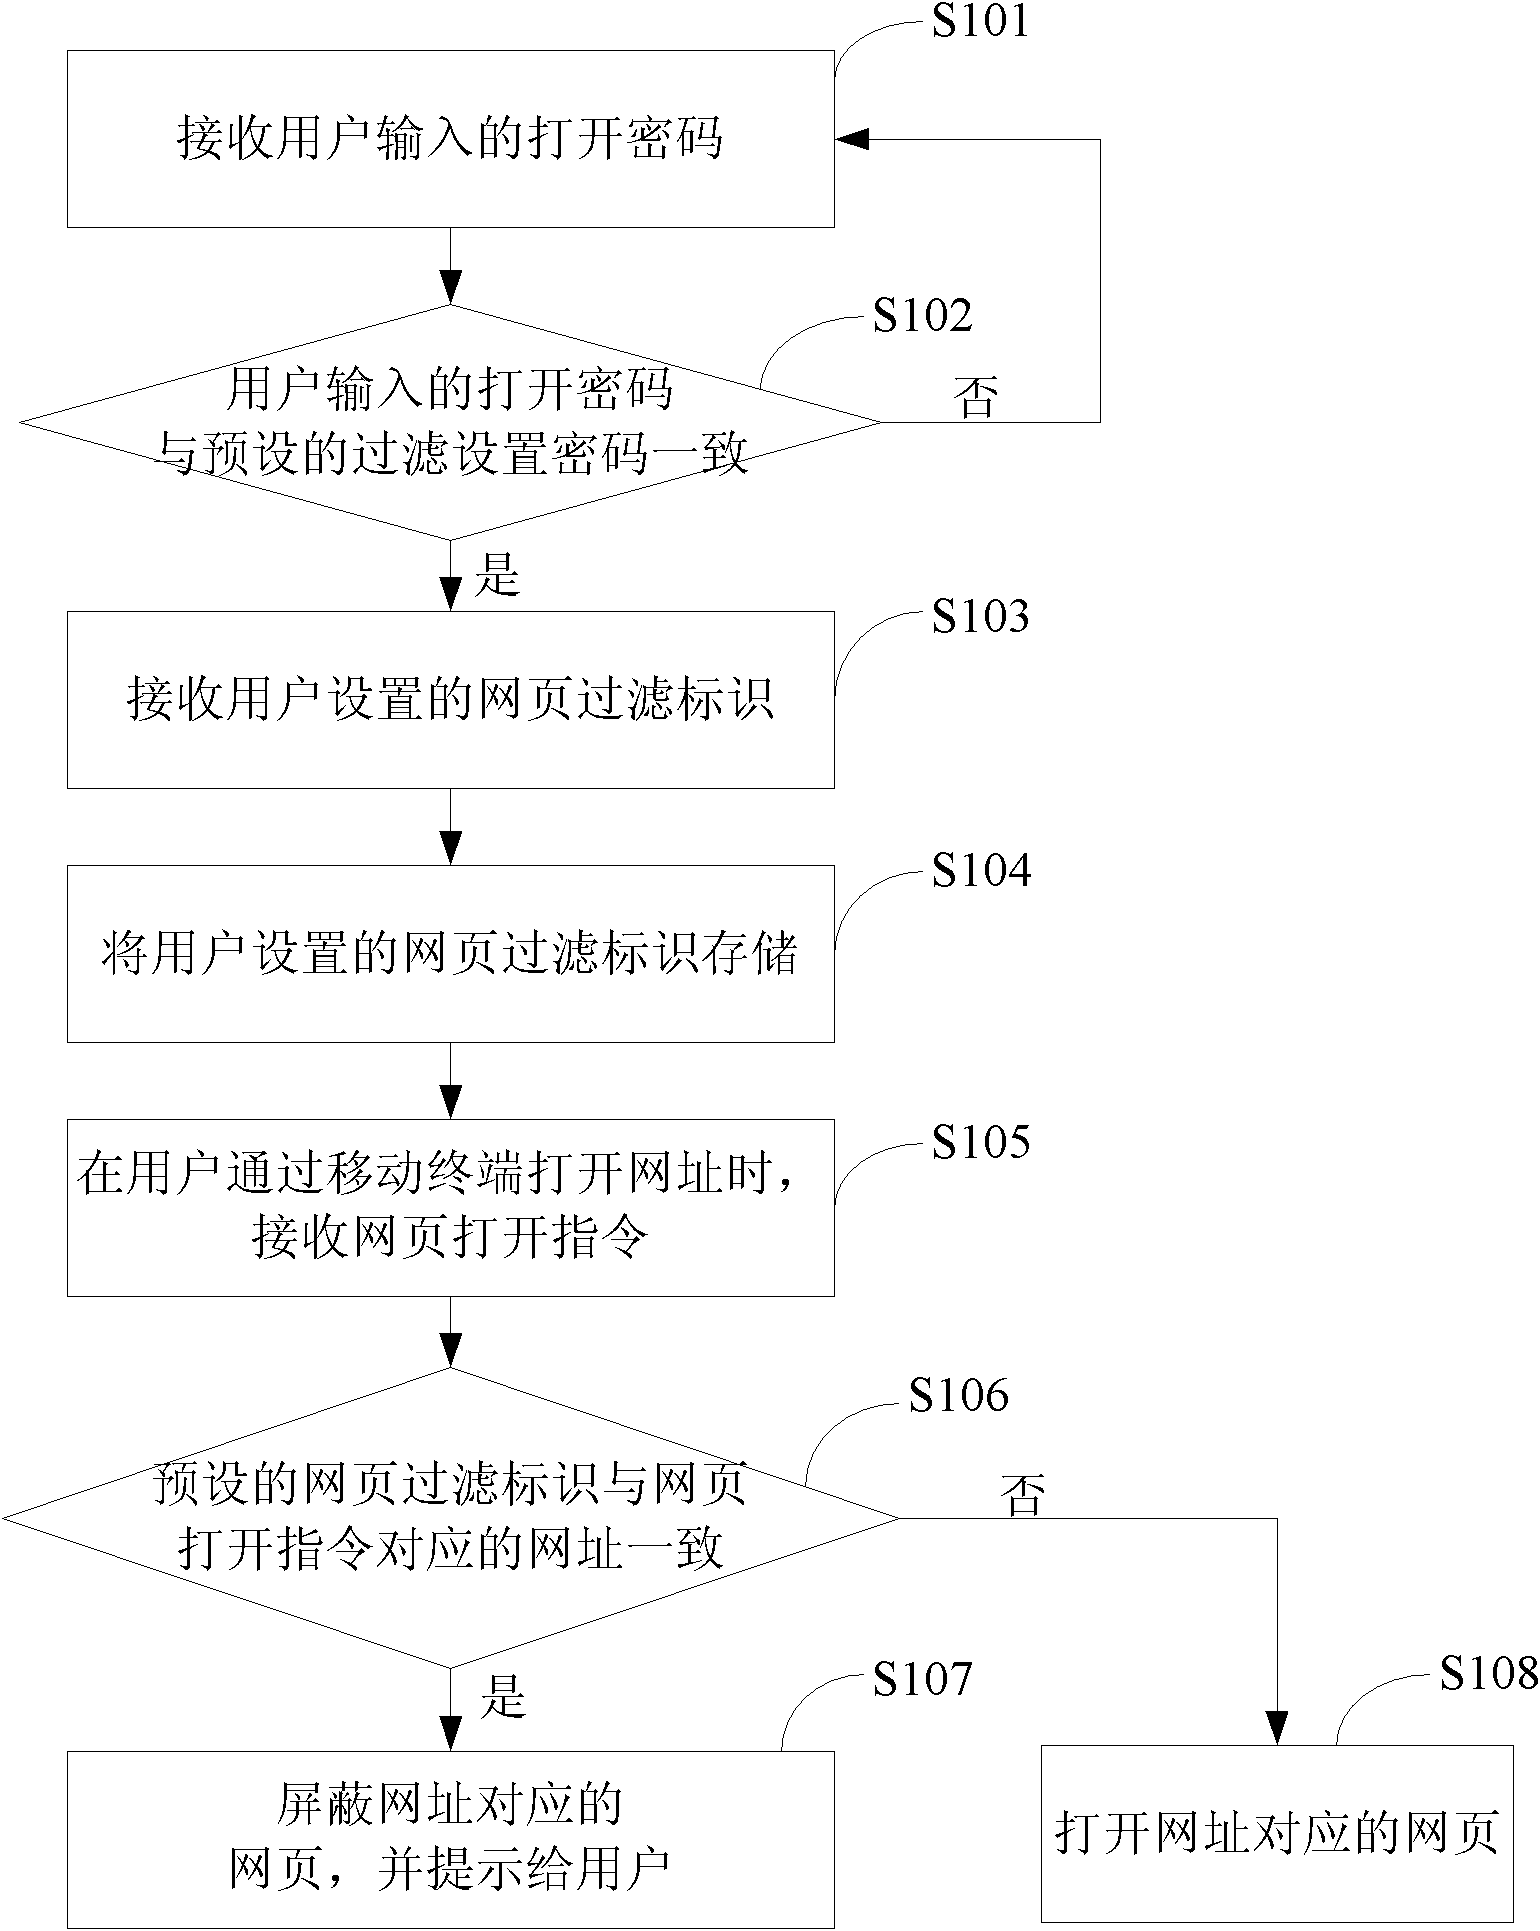 Mobile terminal webpage display control method and device